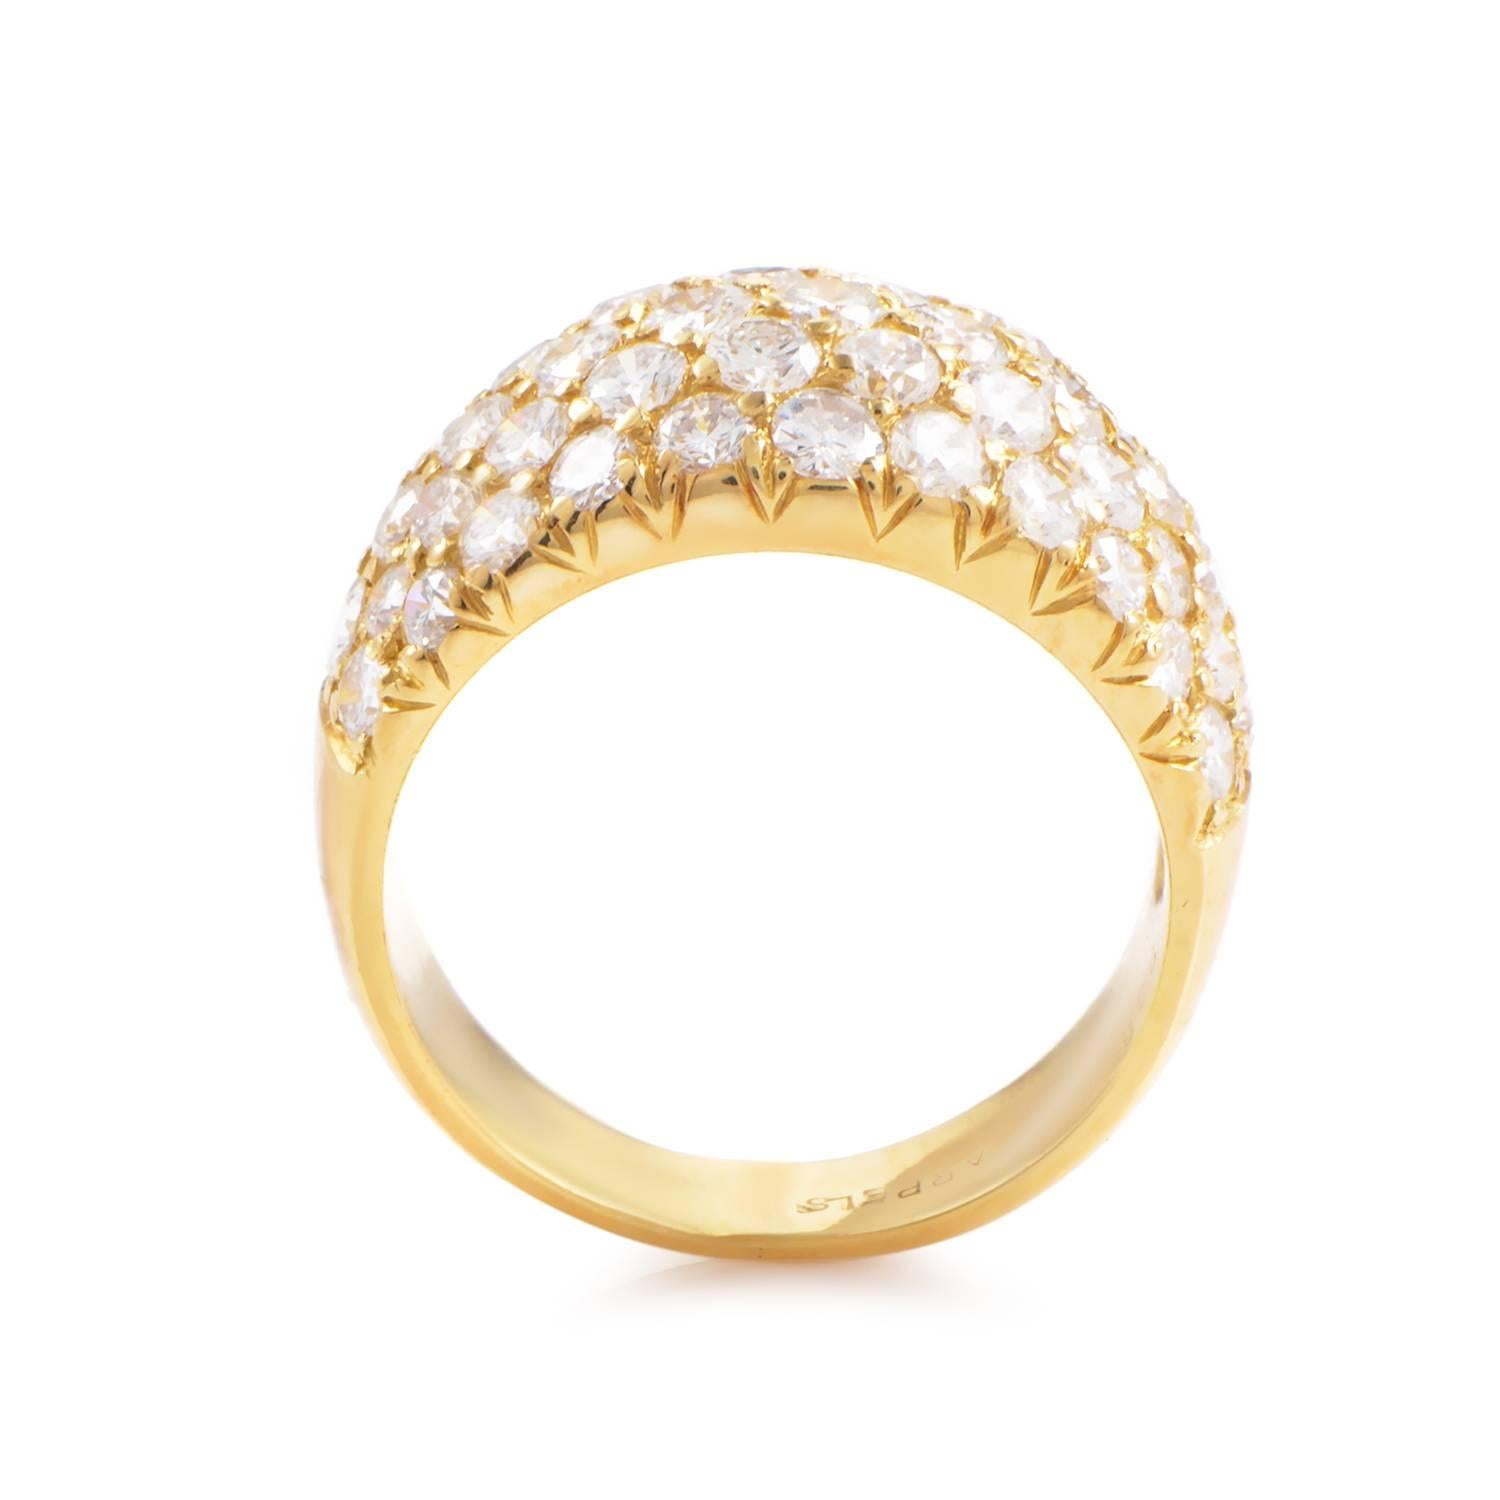 Van Cleef & Arpels has created a gorgeous ring design. 18K Yellow Gold expands into a bold band. As it crests the stunning spill of 2.36ct diamonds accentuates its arc. Weighing 6 grams and boasting the brand's 